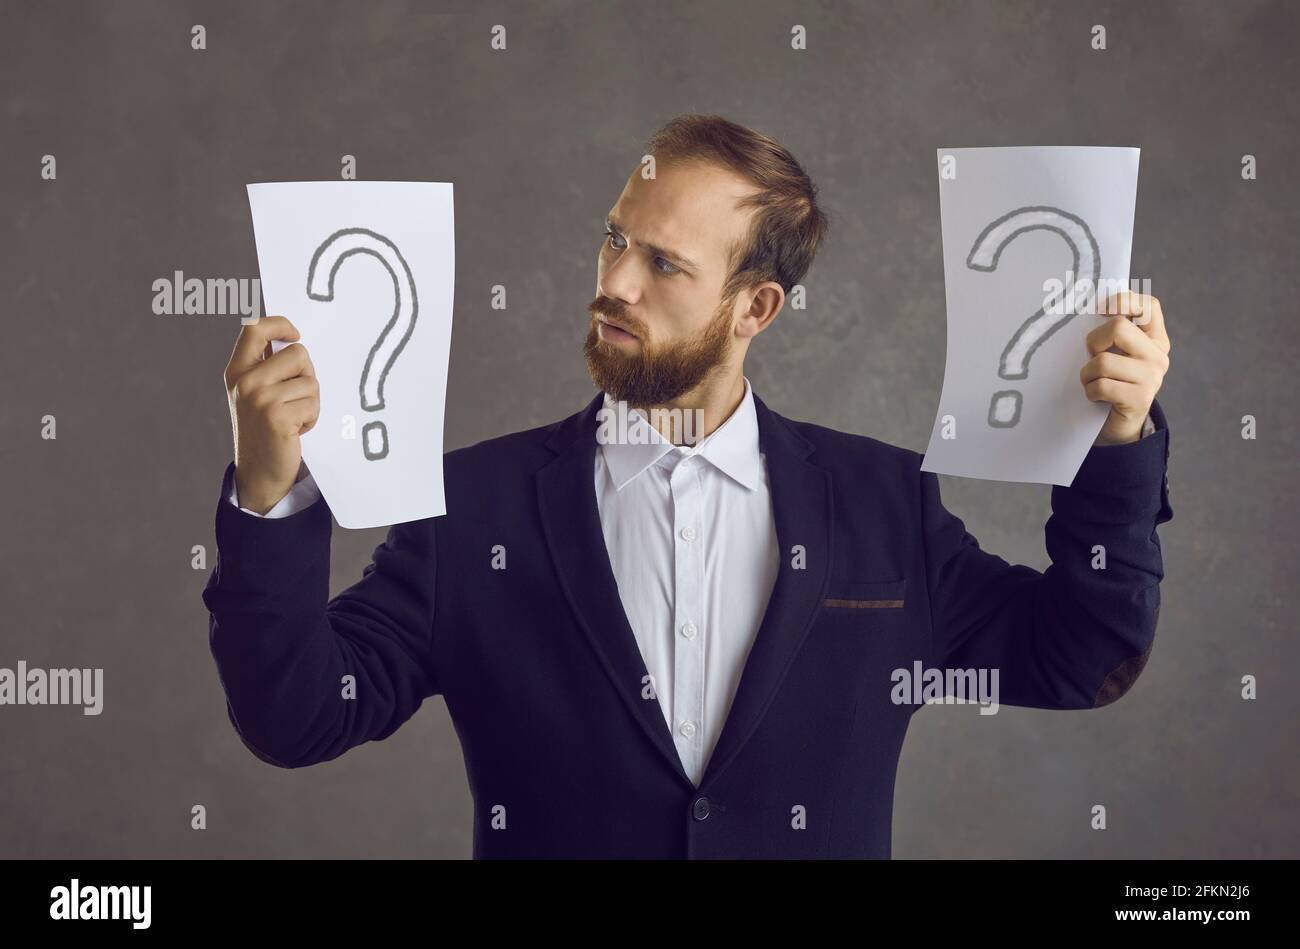 Puzzled businessman holding two question marks asking himself what decision to take Stock Photo